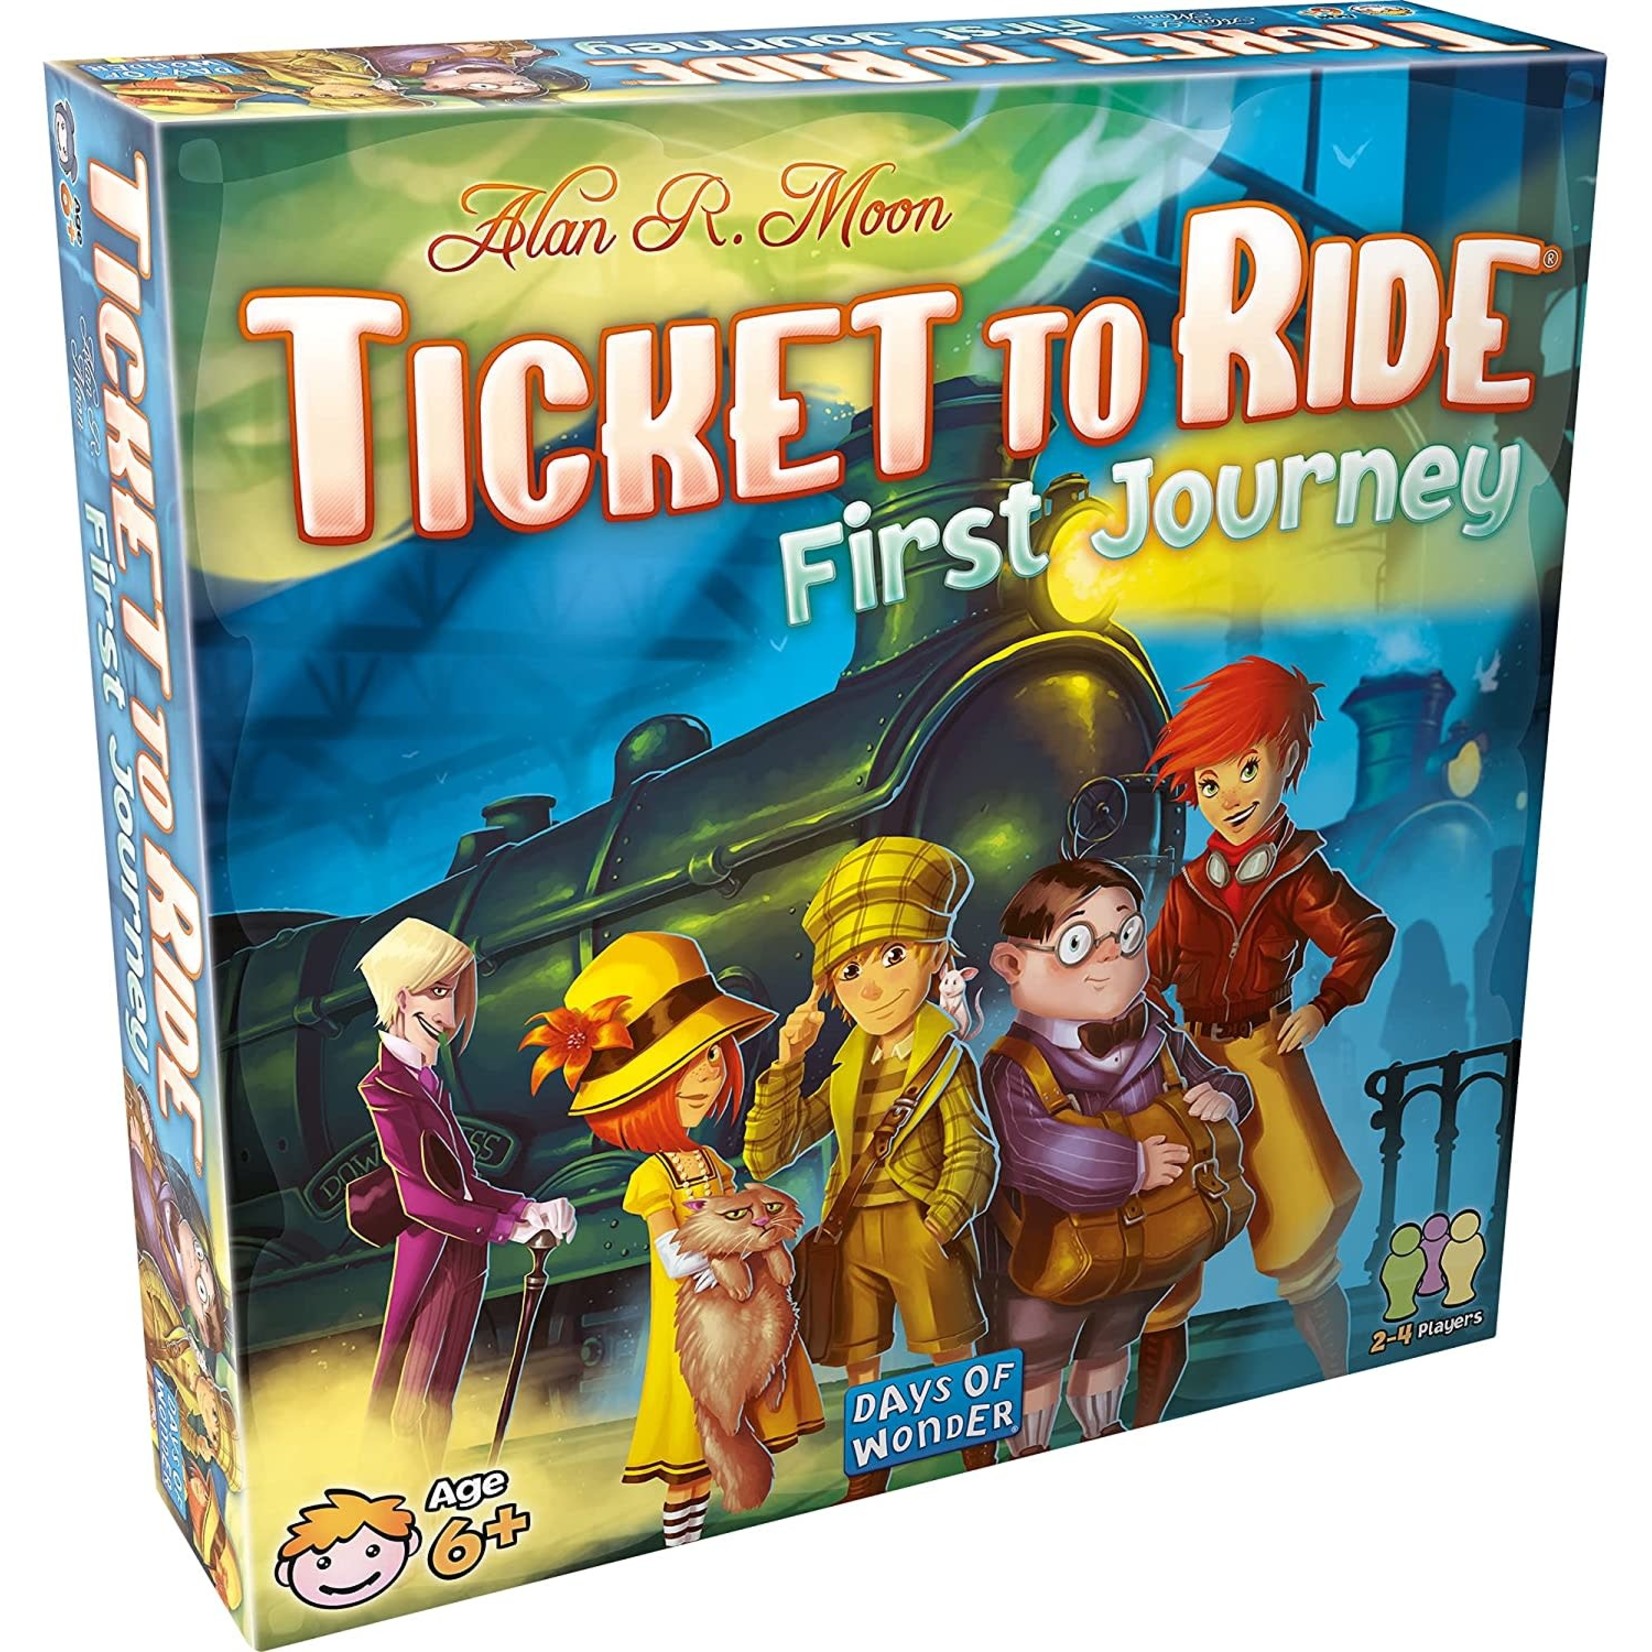 Ticket to Ride: First Journey Board Game